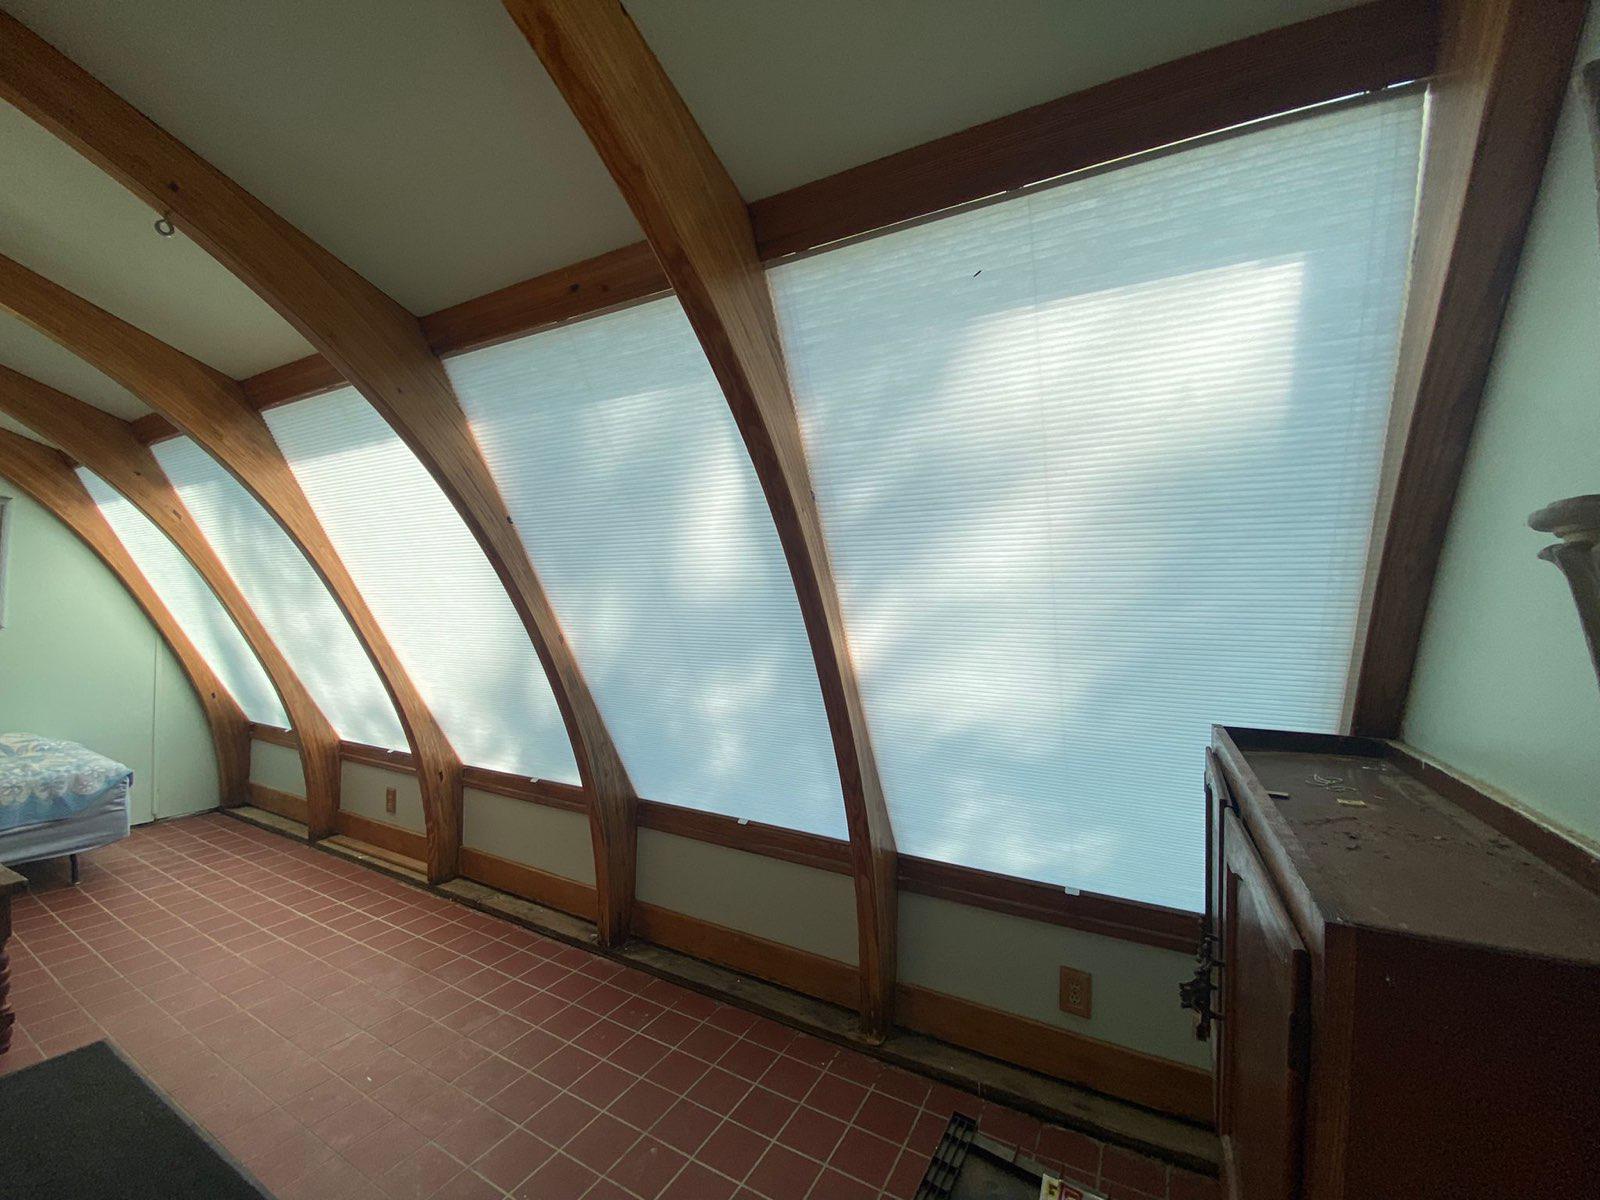 Converting a sunroom into a bedroom or another type of space? Or maybe you just want a little more shade! We added shade here in this Stephentown sunroom with our Cellular Shades, which work great on slanted windows!